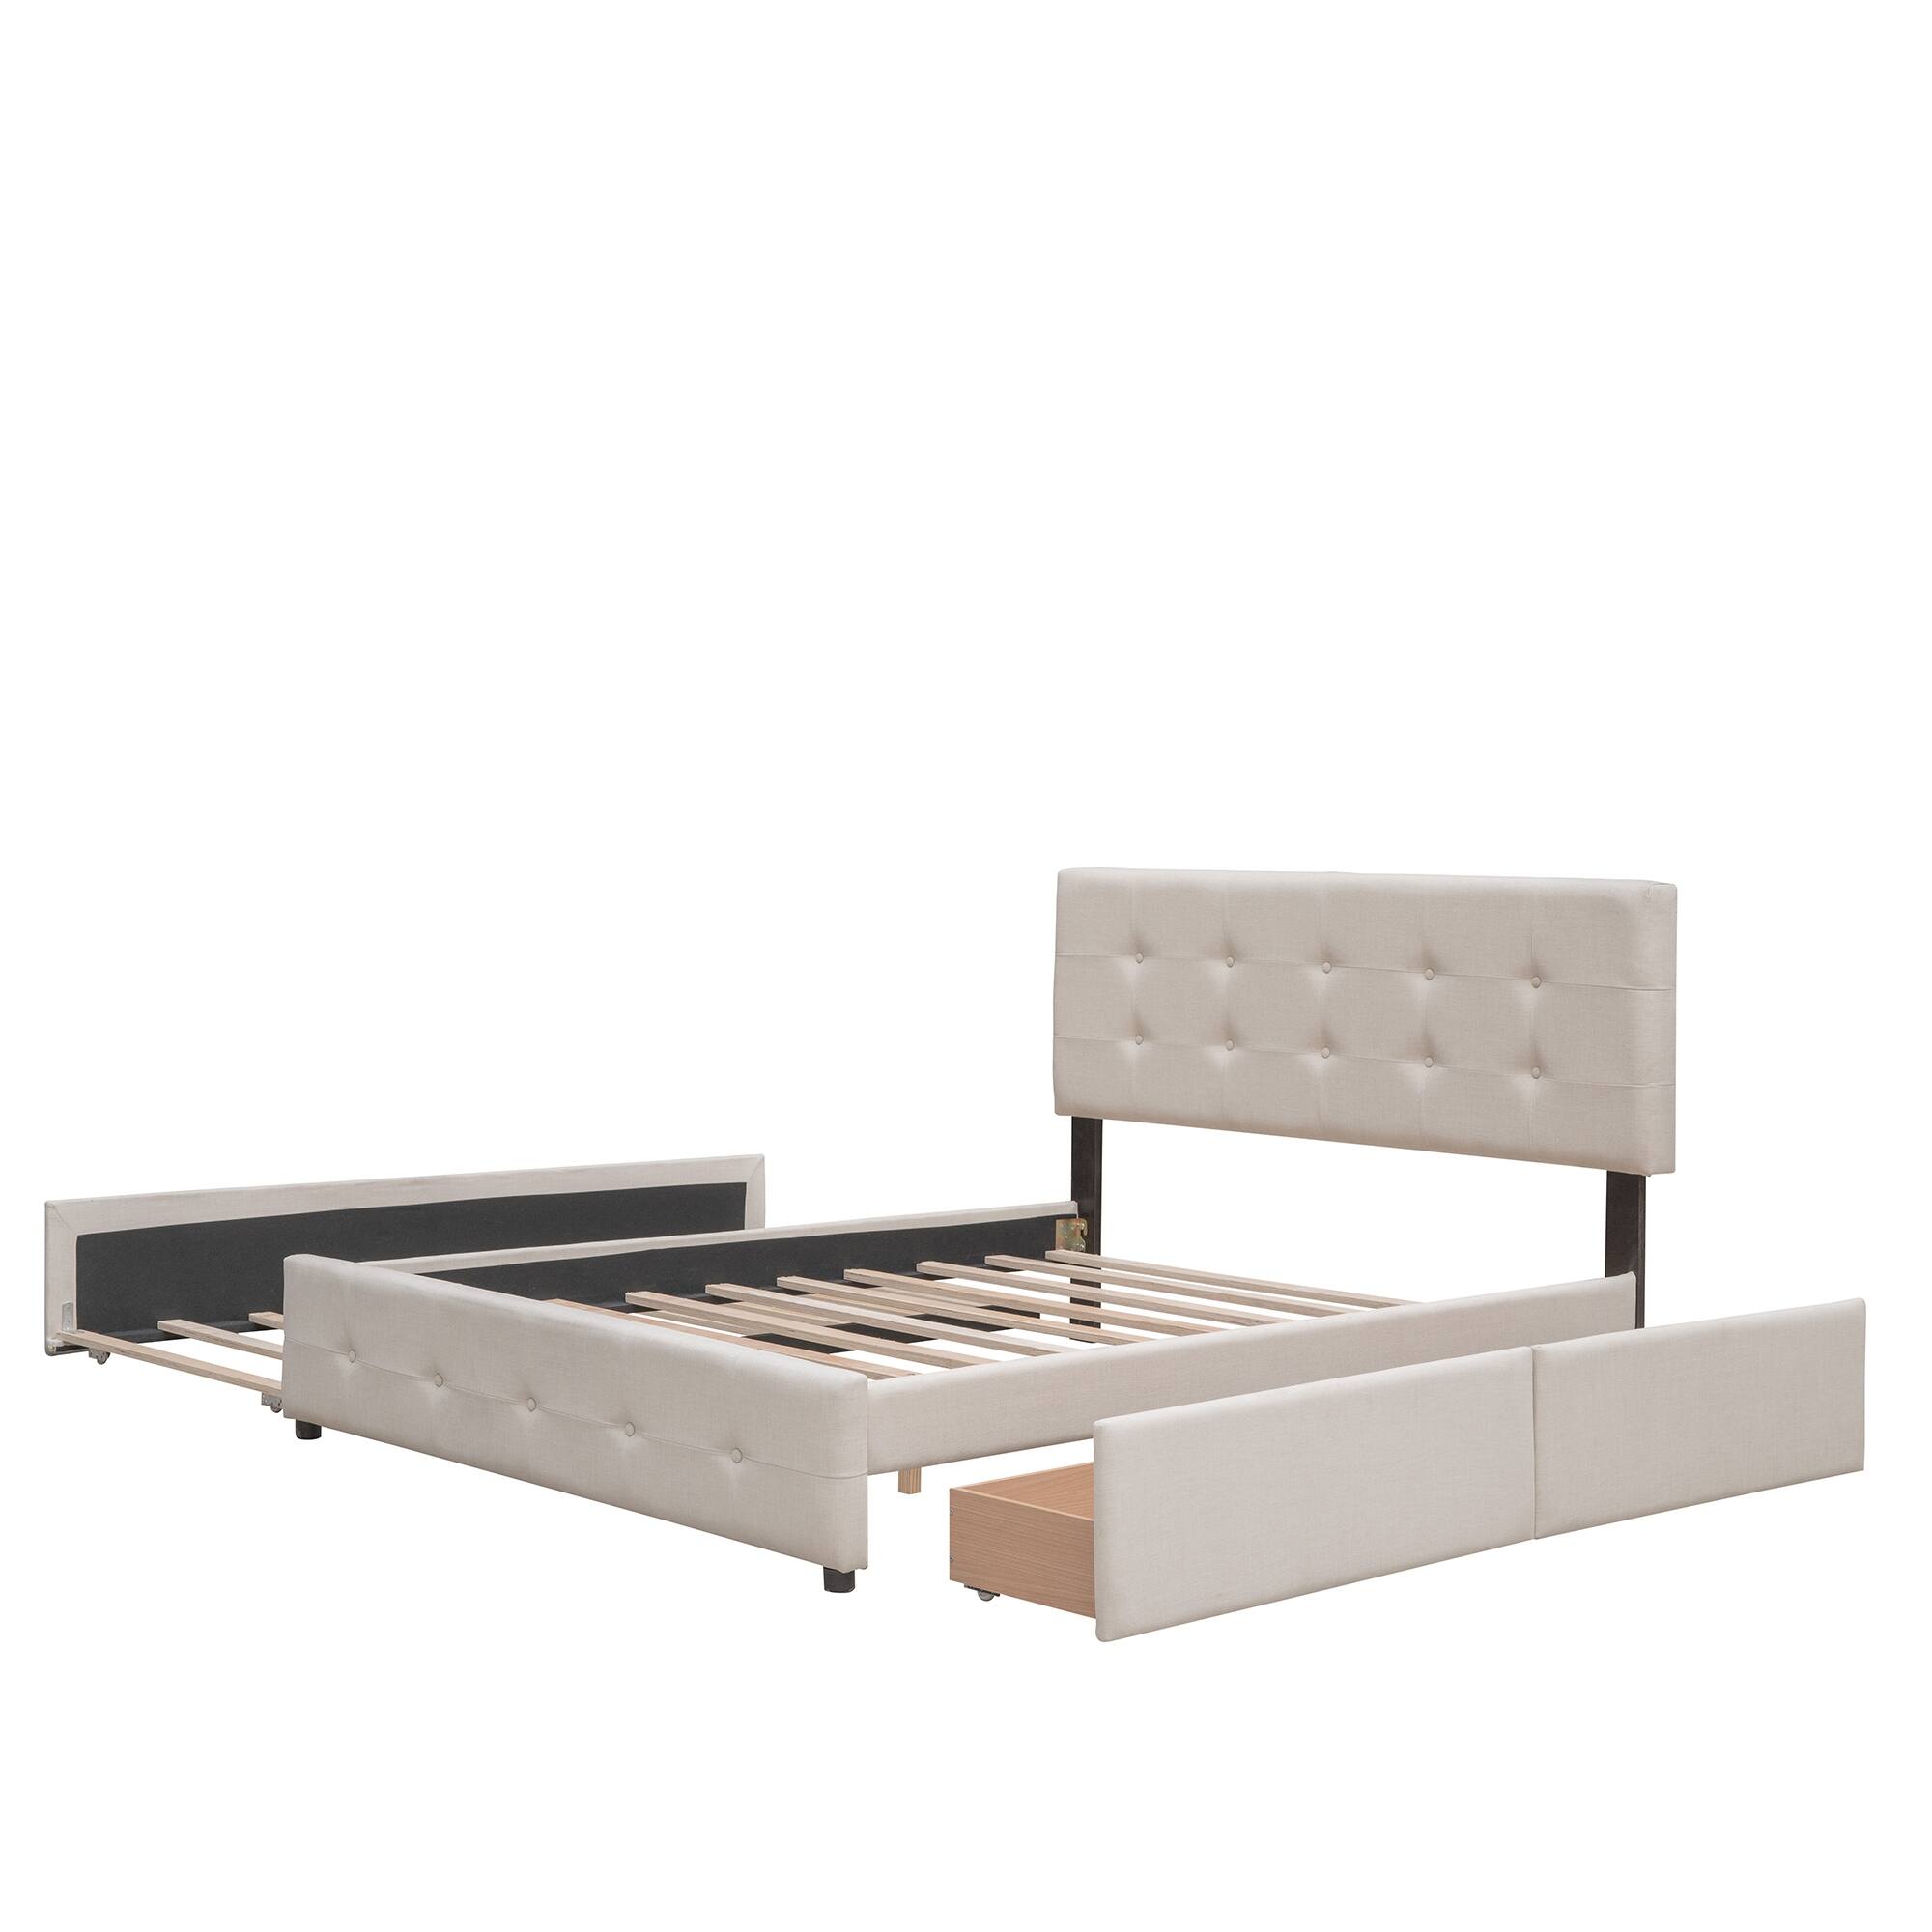 Upholstered Platform Bed with 2 Drawers and 1 Twin XL Trundle, Linen Fabric, Queen Size - Dark Gray